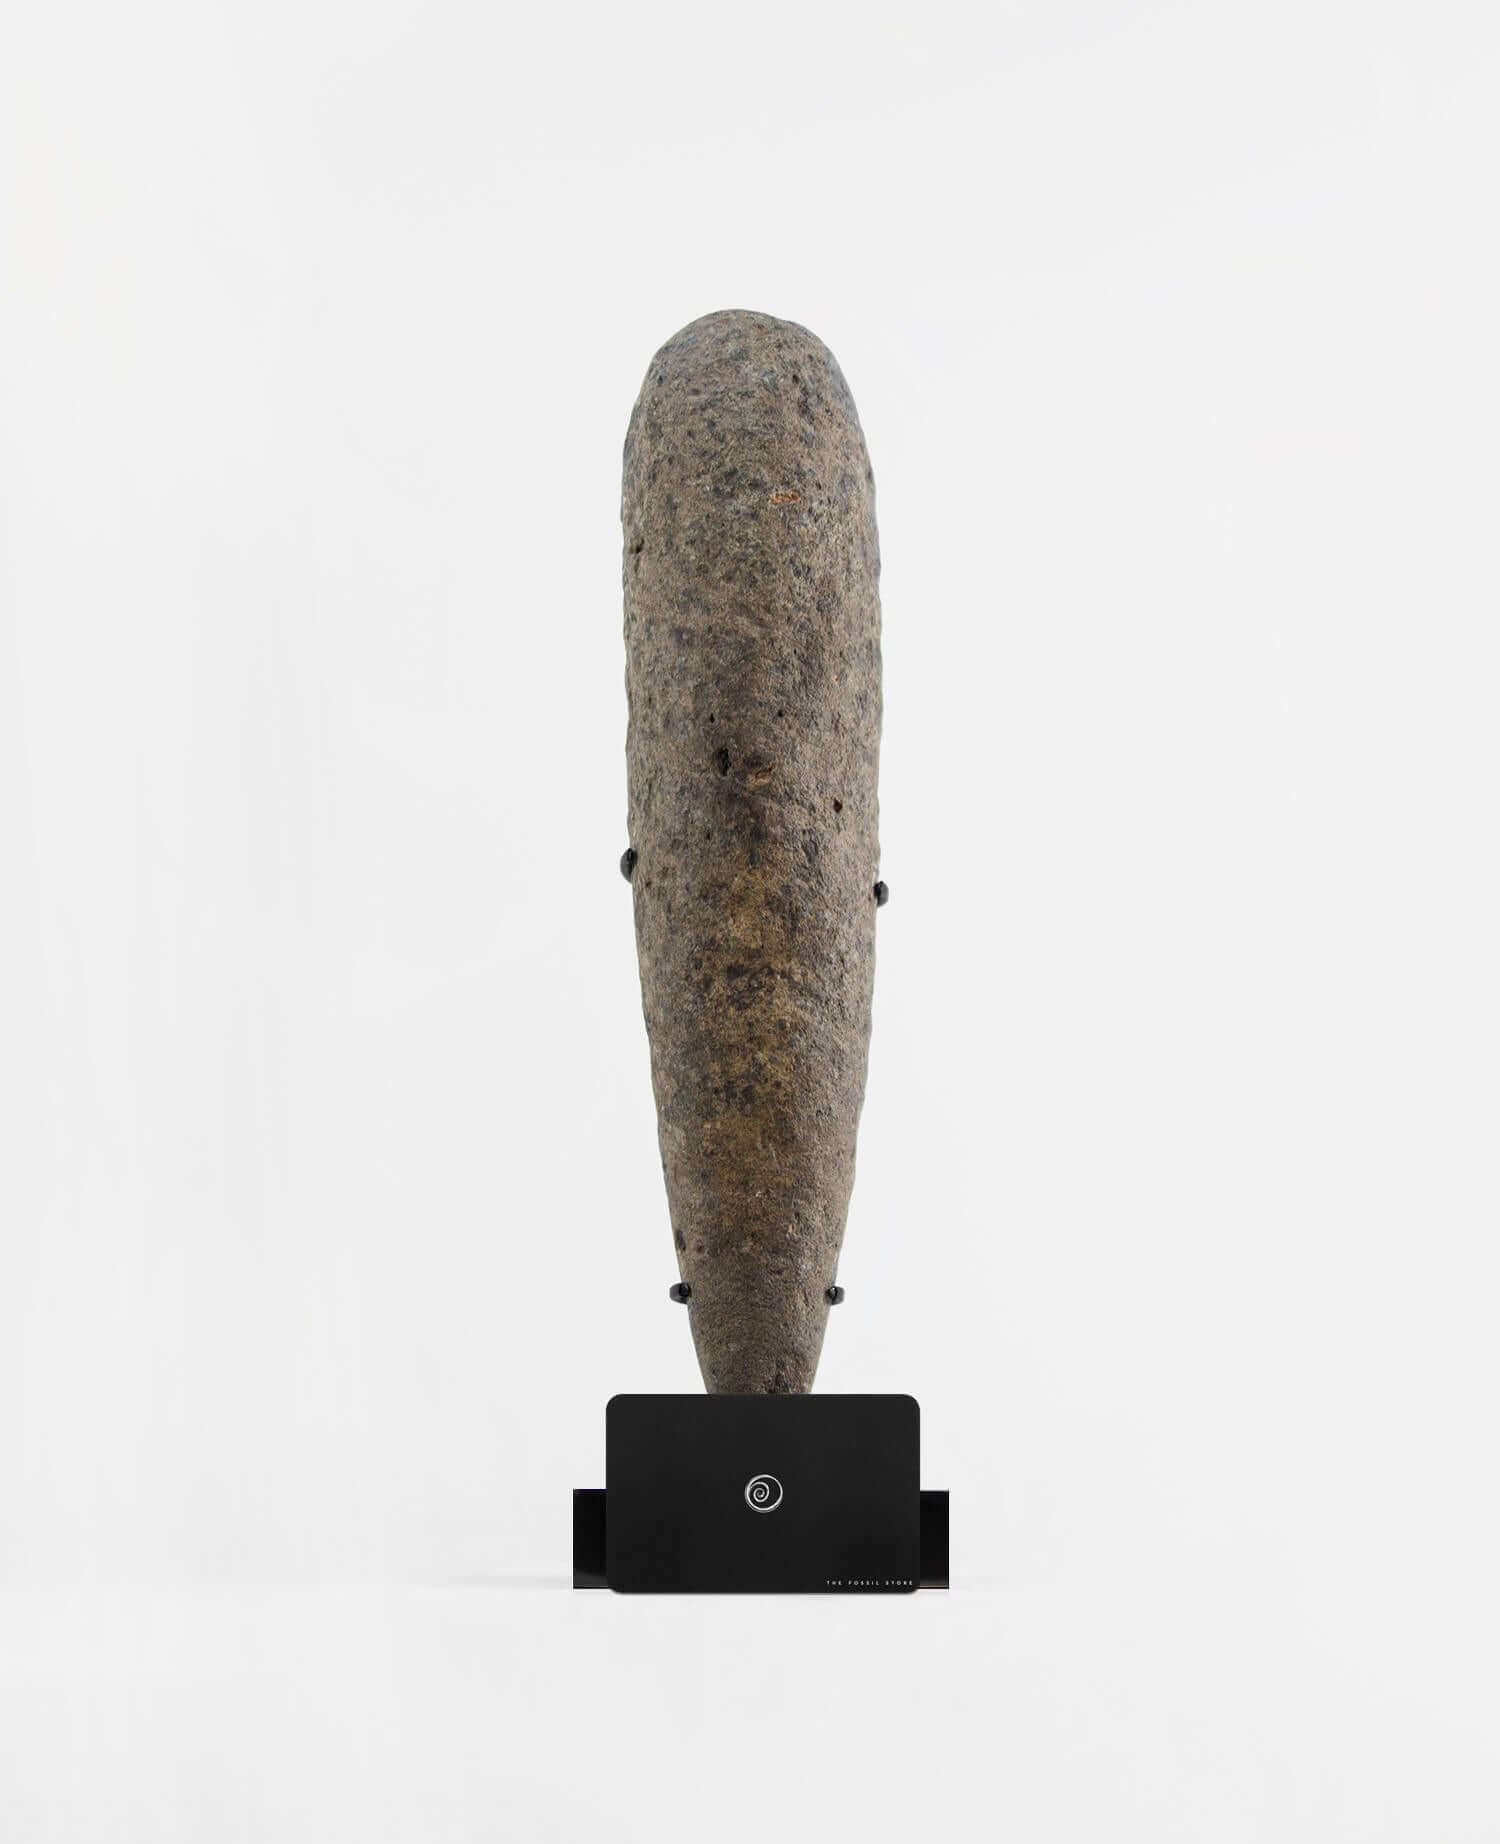 A stunning museum-standard rare authentic Neolithic pestle measuring 350mm created by an ancient hand